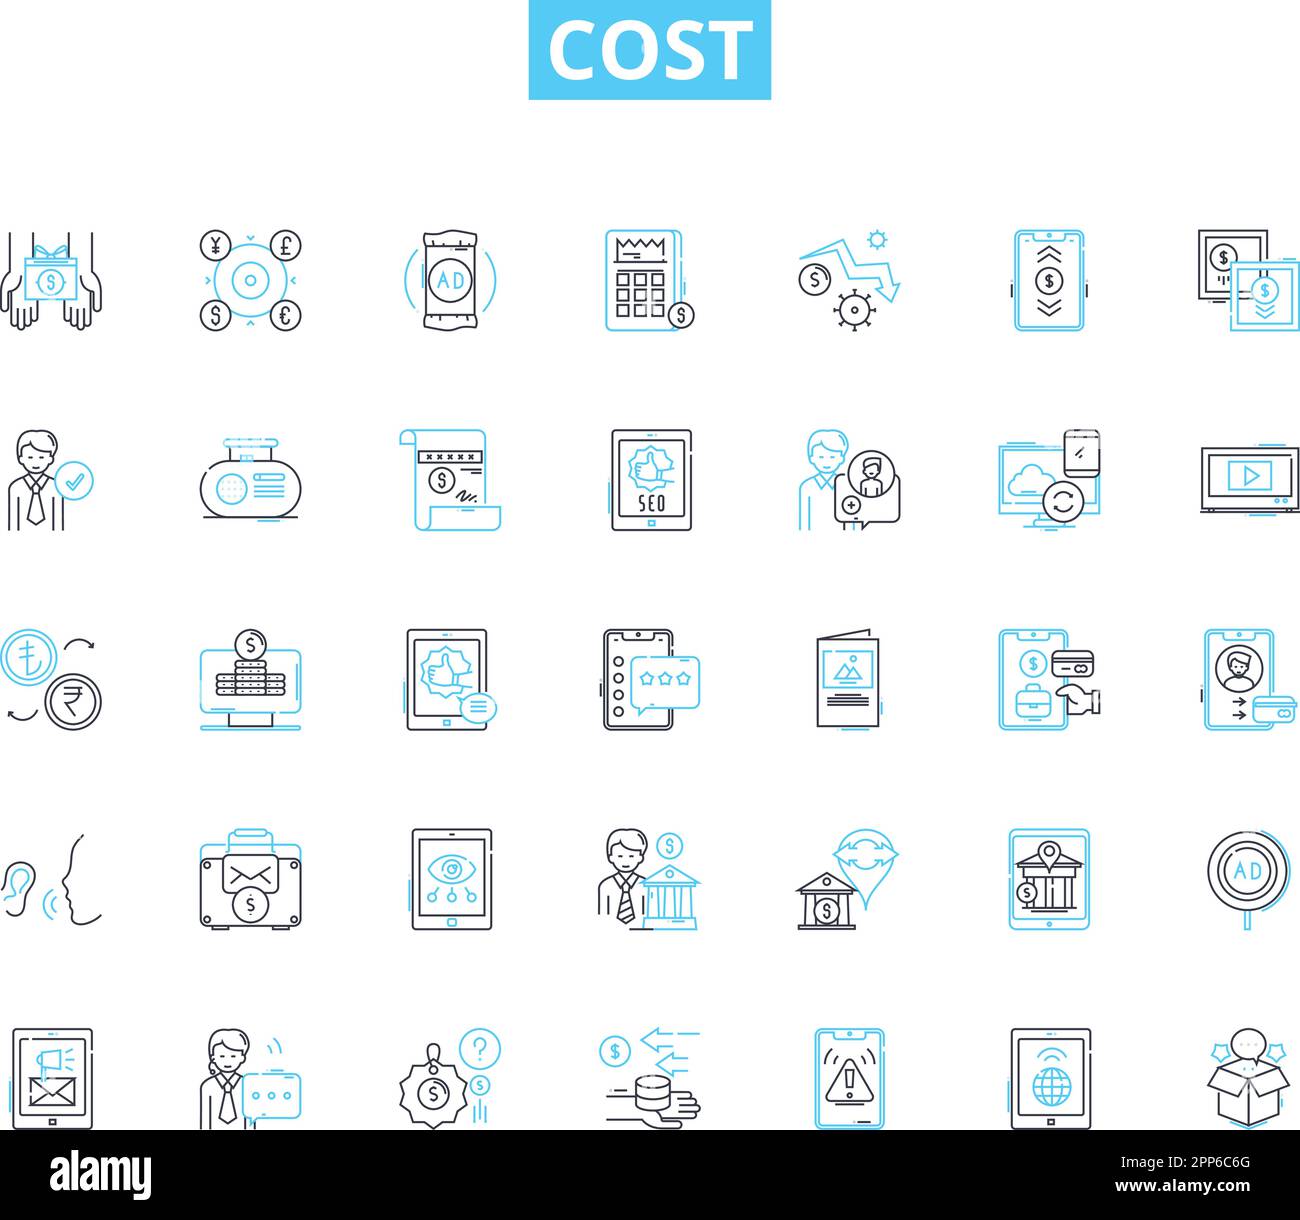 Cost linear icons set. Expense, Budget, Price, Value, Investment, Worth, Account line vector and concept signs. Outlay,Spending,Costliness outline Stock Vector